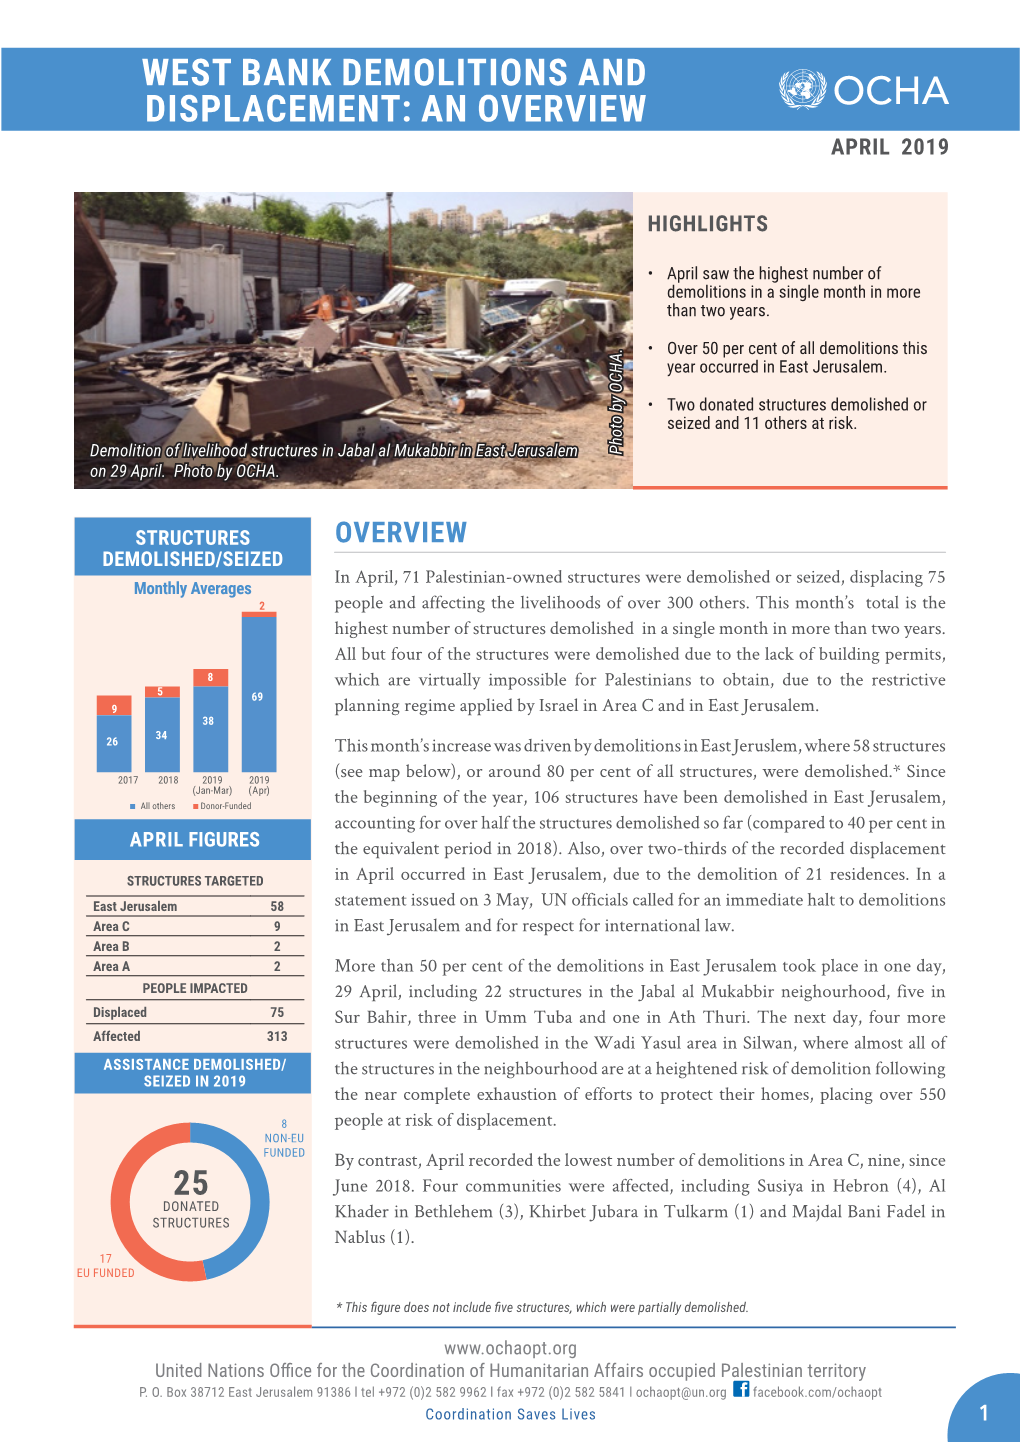 West Bank Demolitions and Displacement: an Overview April 2019